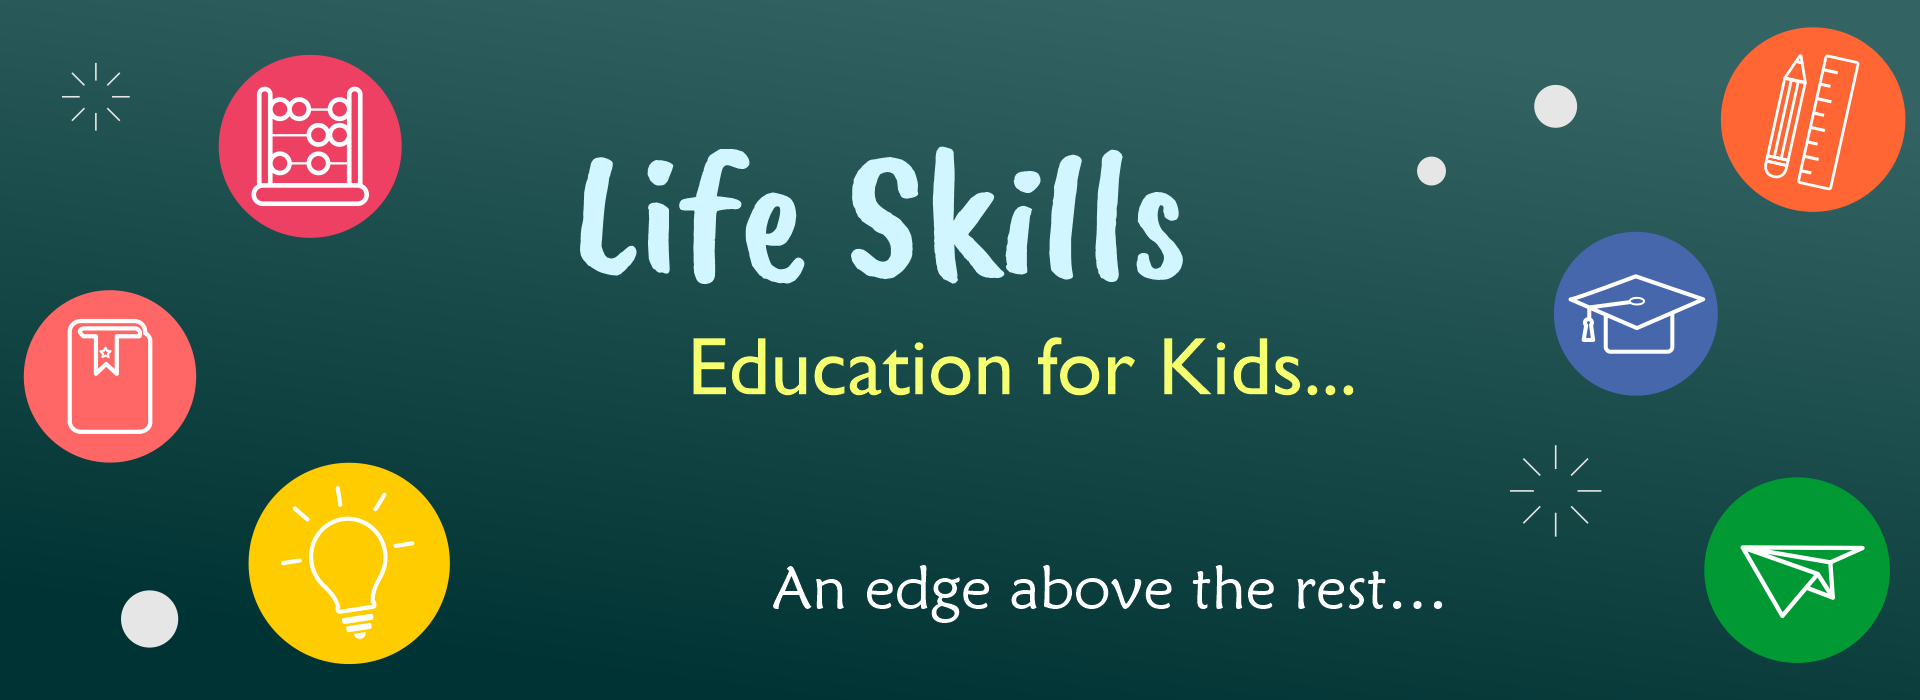 what is the life skills education